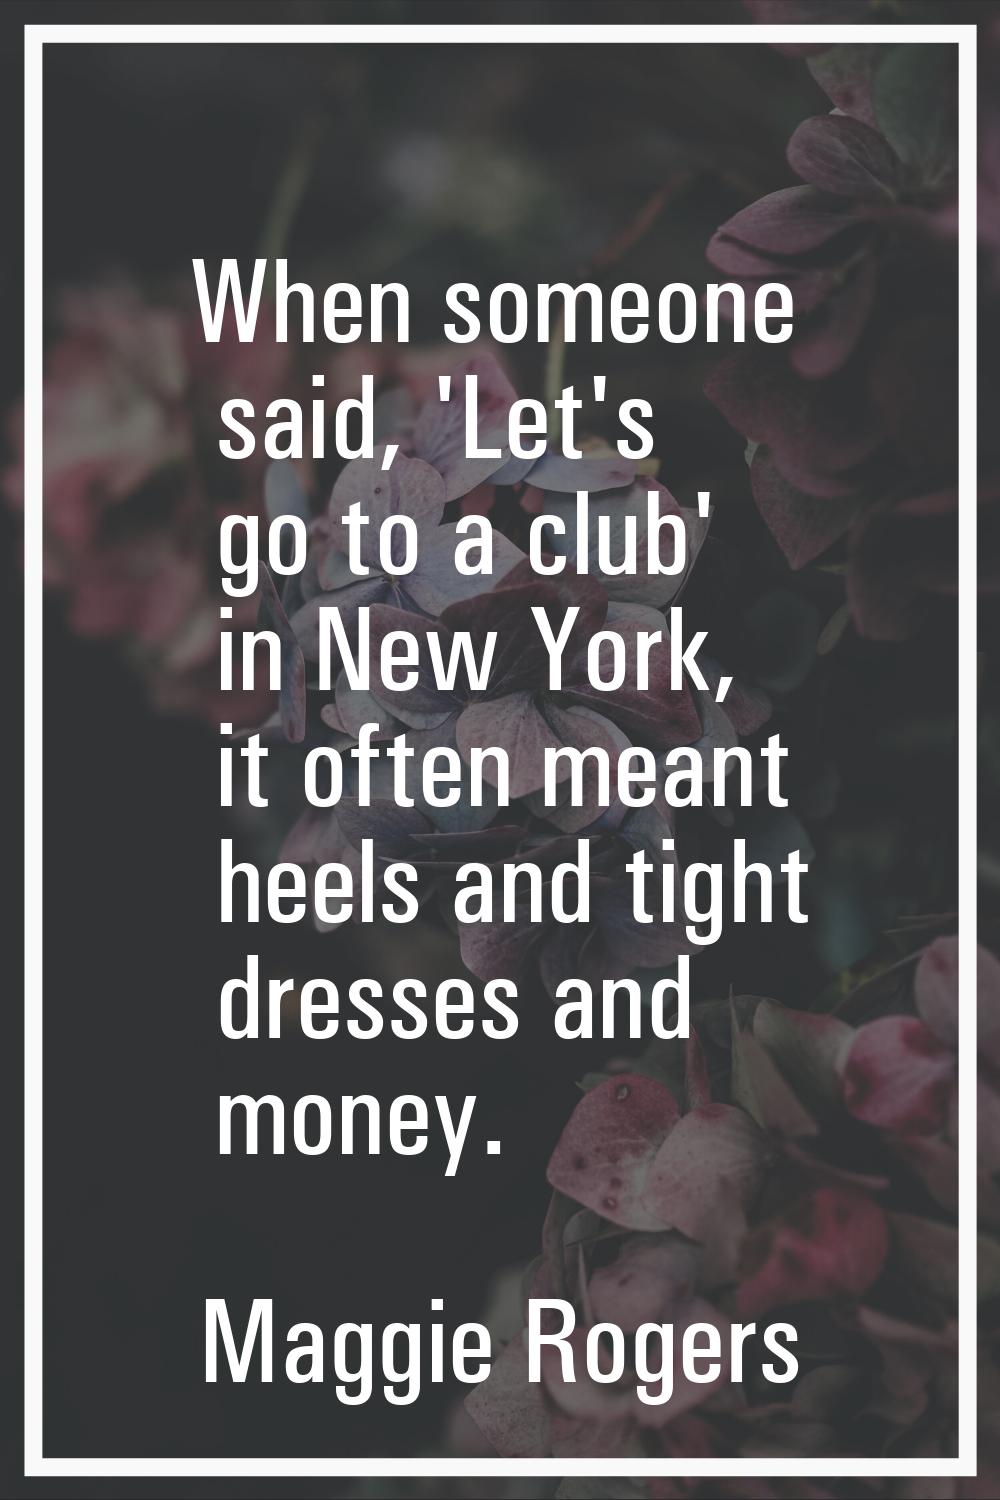 When someone said, 'Let's go to a club' in New York, it often meant heels and tight dresses and mon